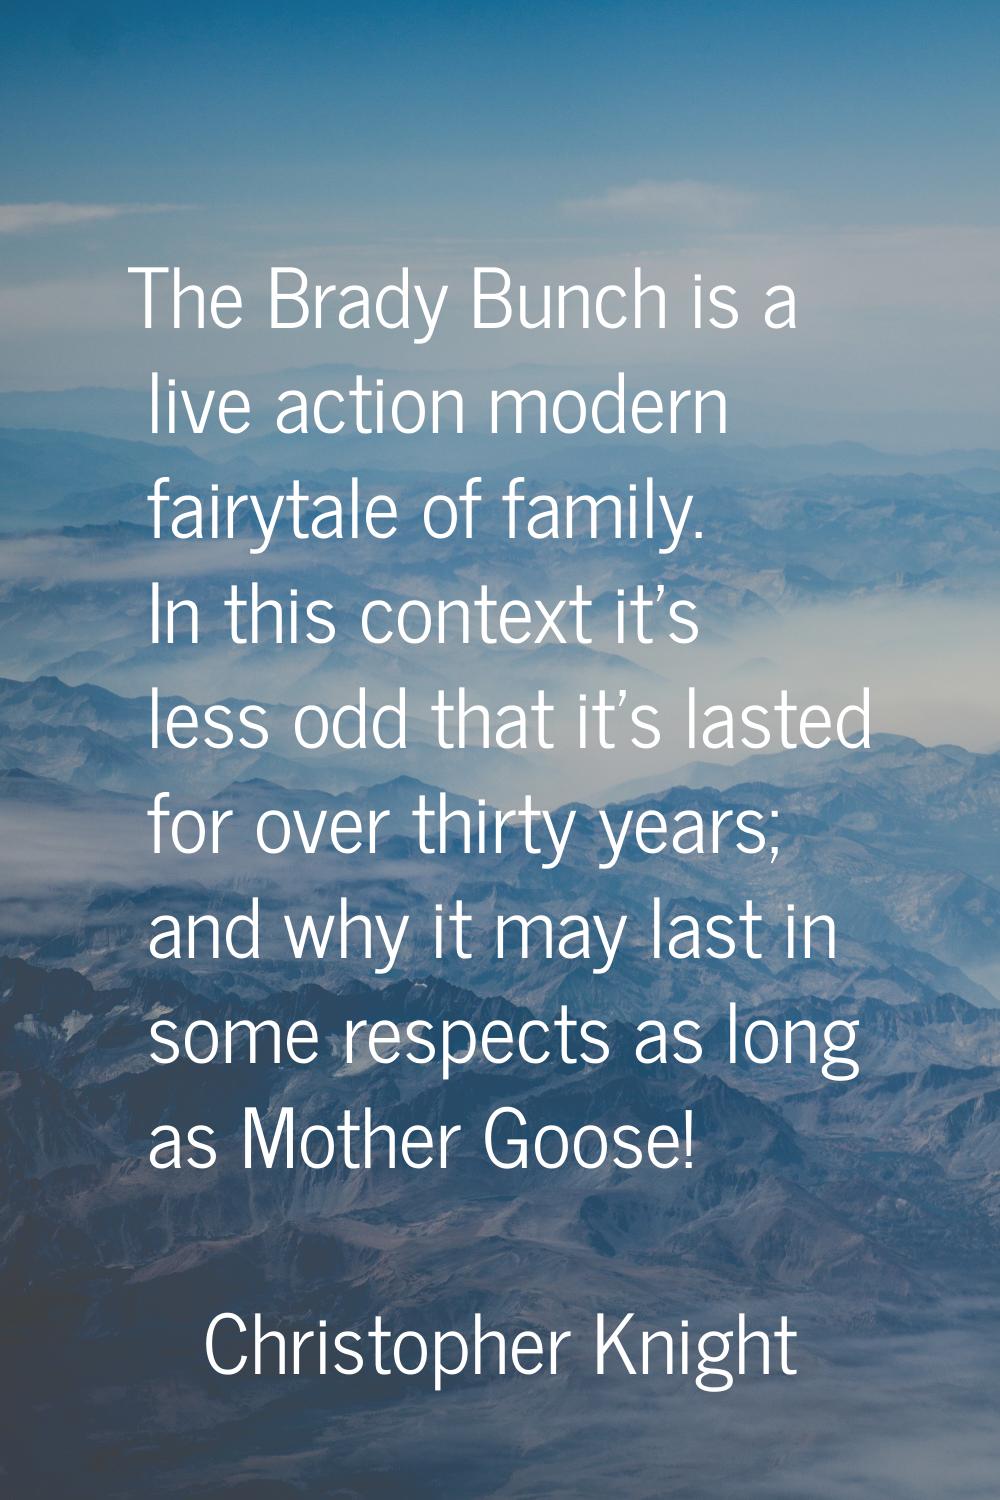 The Brady Bunch is a live action modern fairytale of family. In this context it's less odd that it'